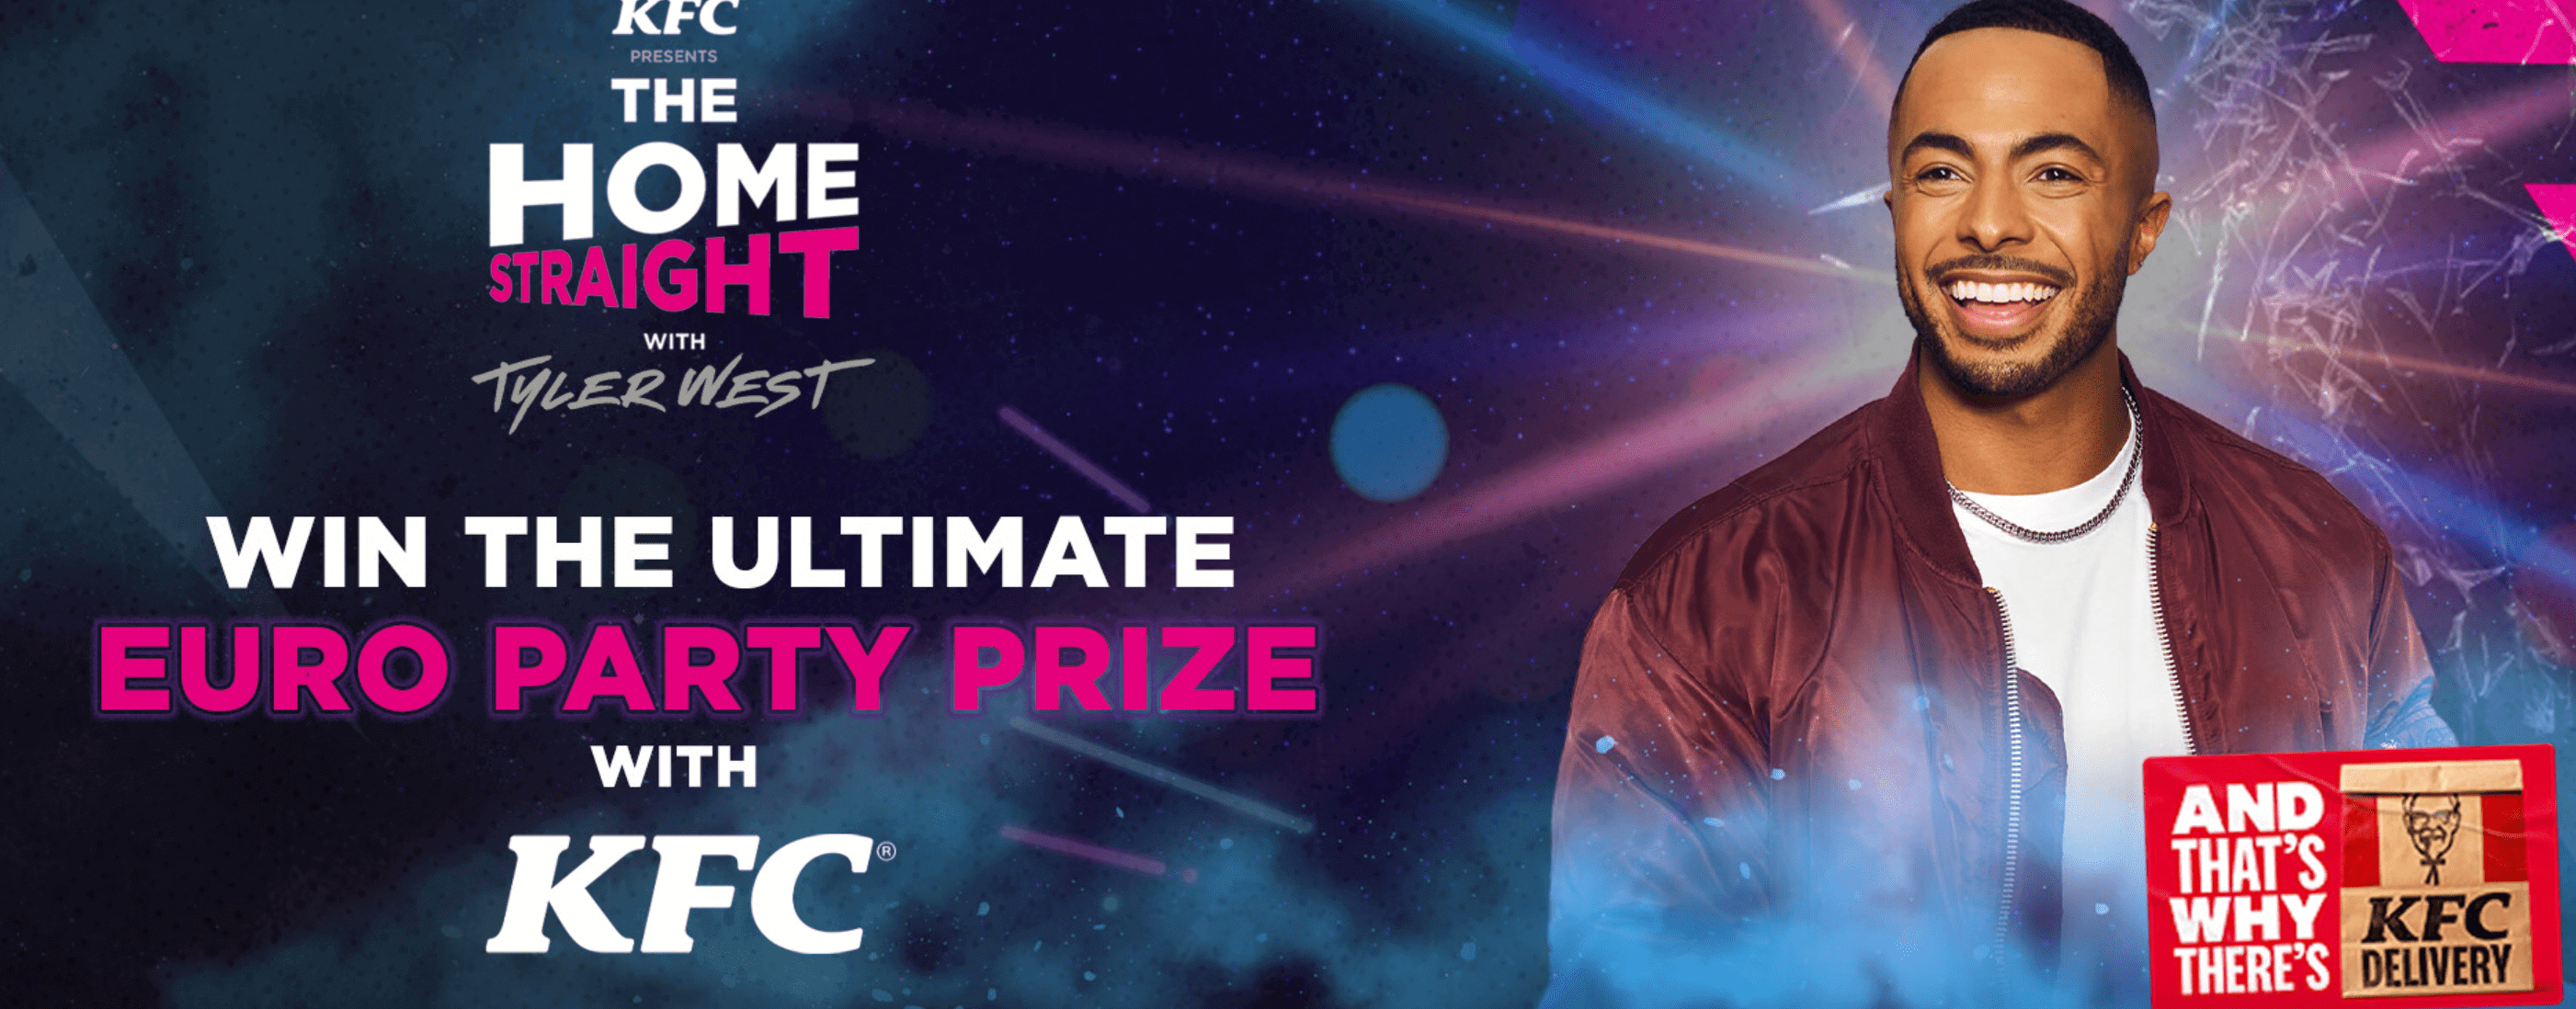 Win the ultimate Euro party prize with KFC and KISS Radio